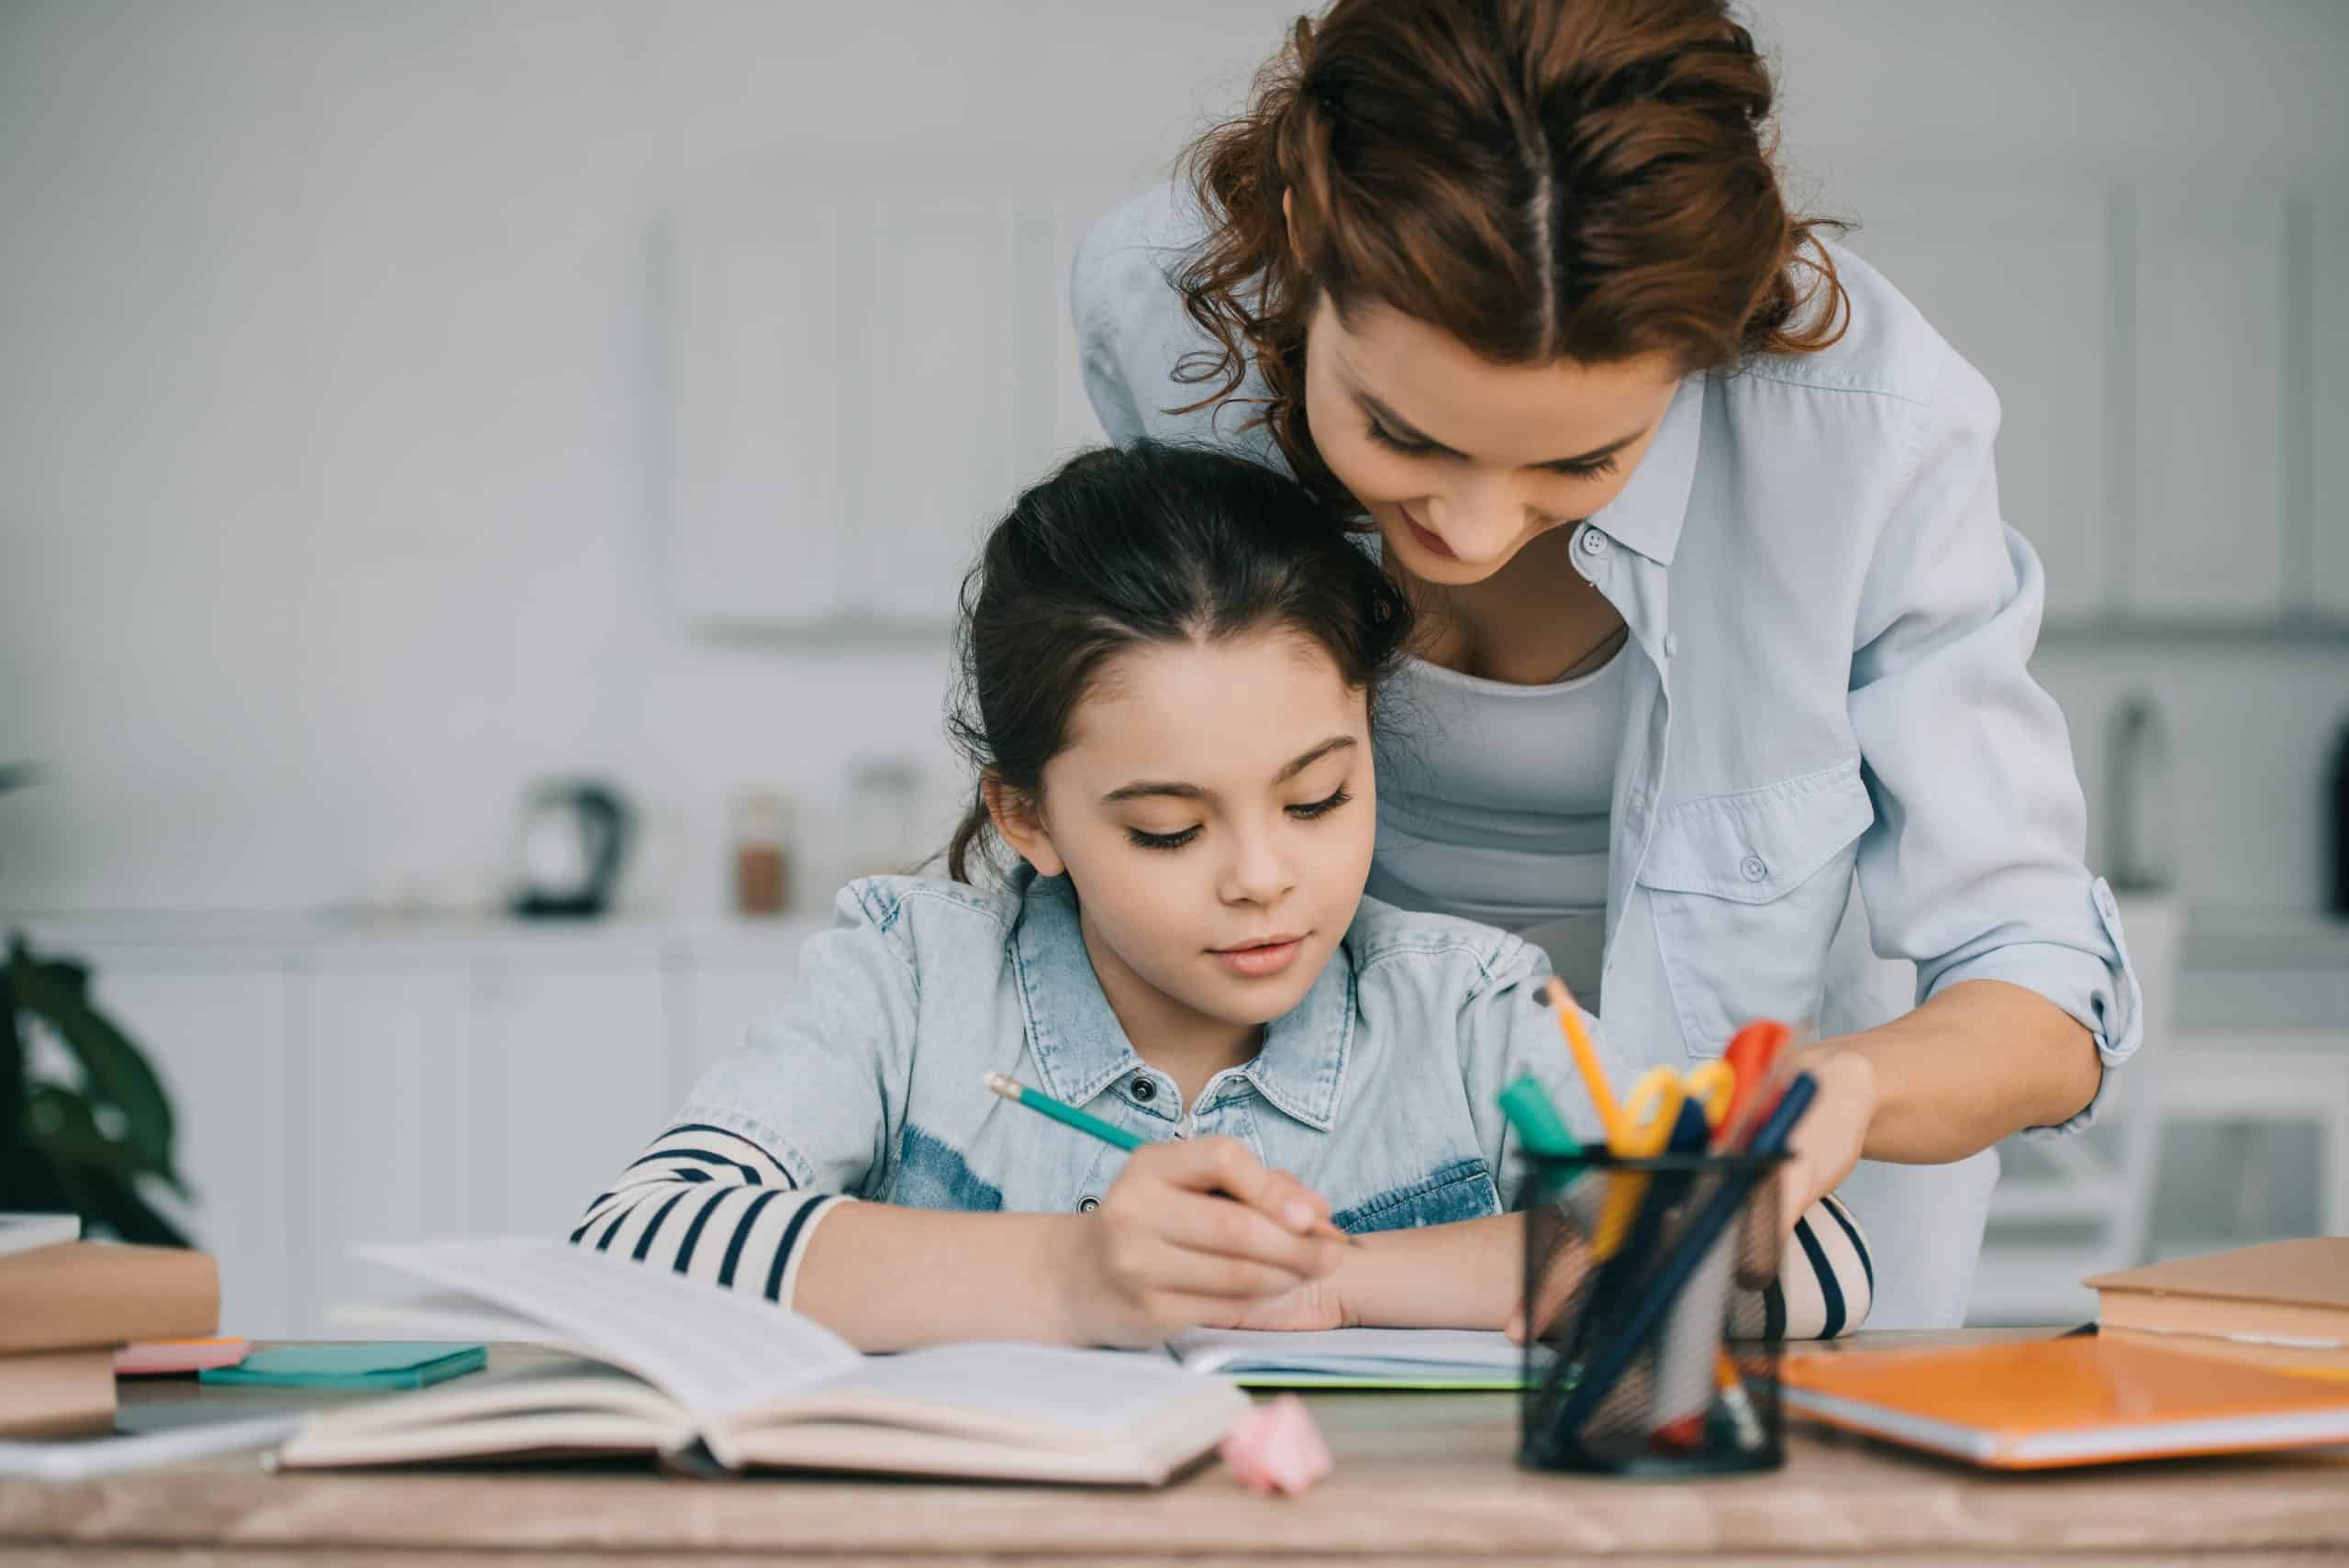 Decided to homeschool? Our storage near Newbury will help you make room. Image shows a mother and a daughter sat at the table with a pen pot and looking at books together.